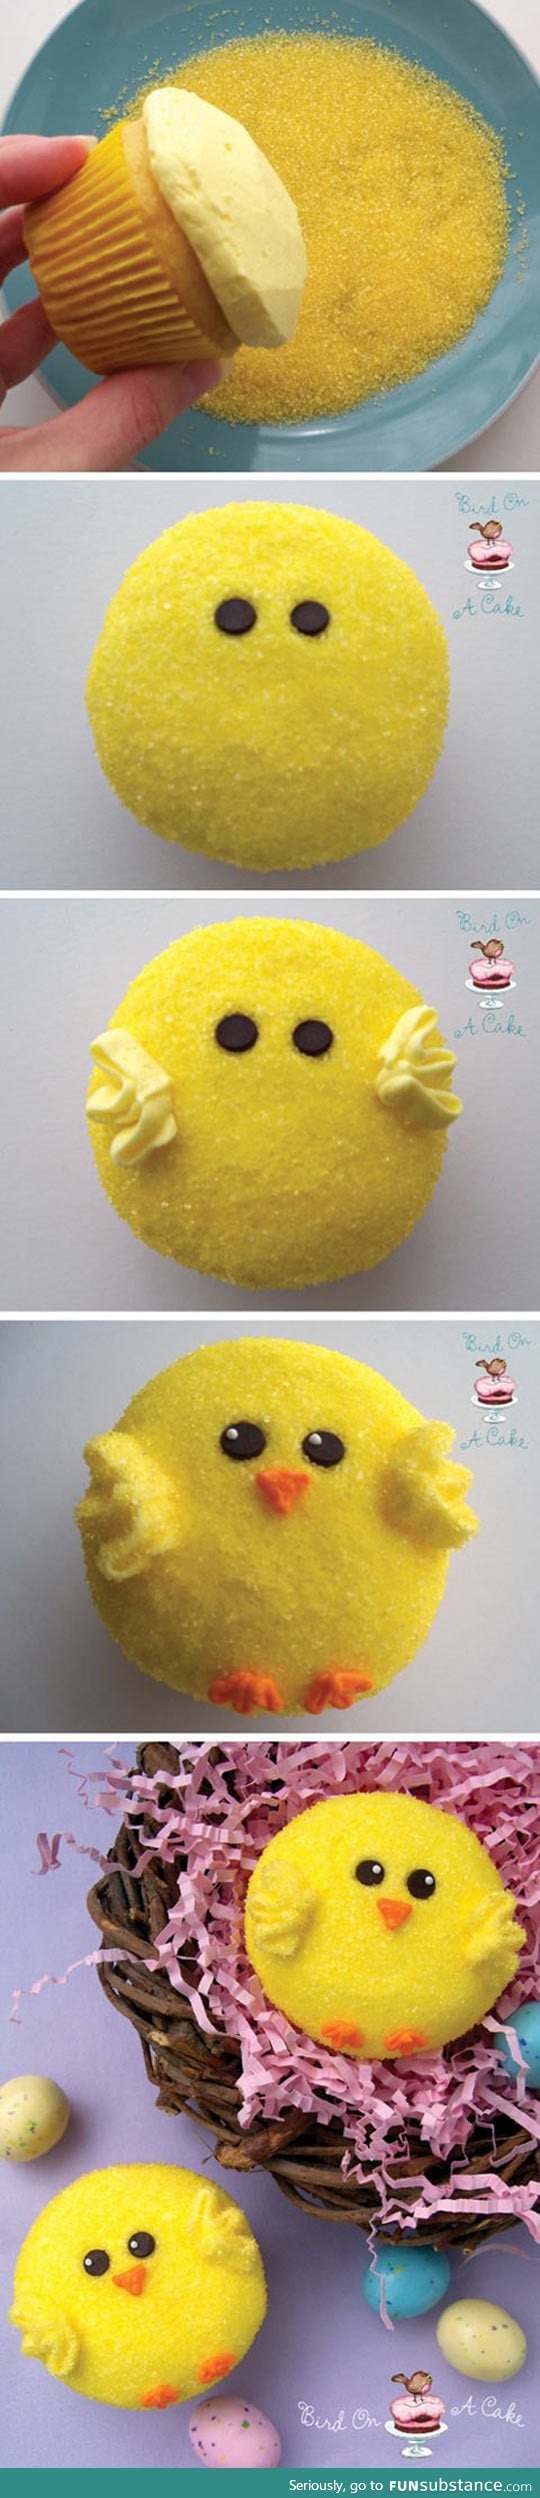 Simple chick cupcakes